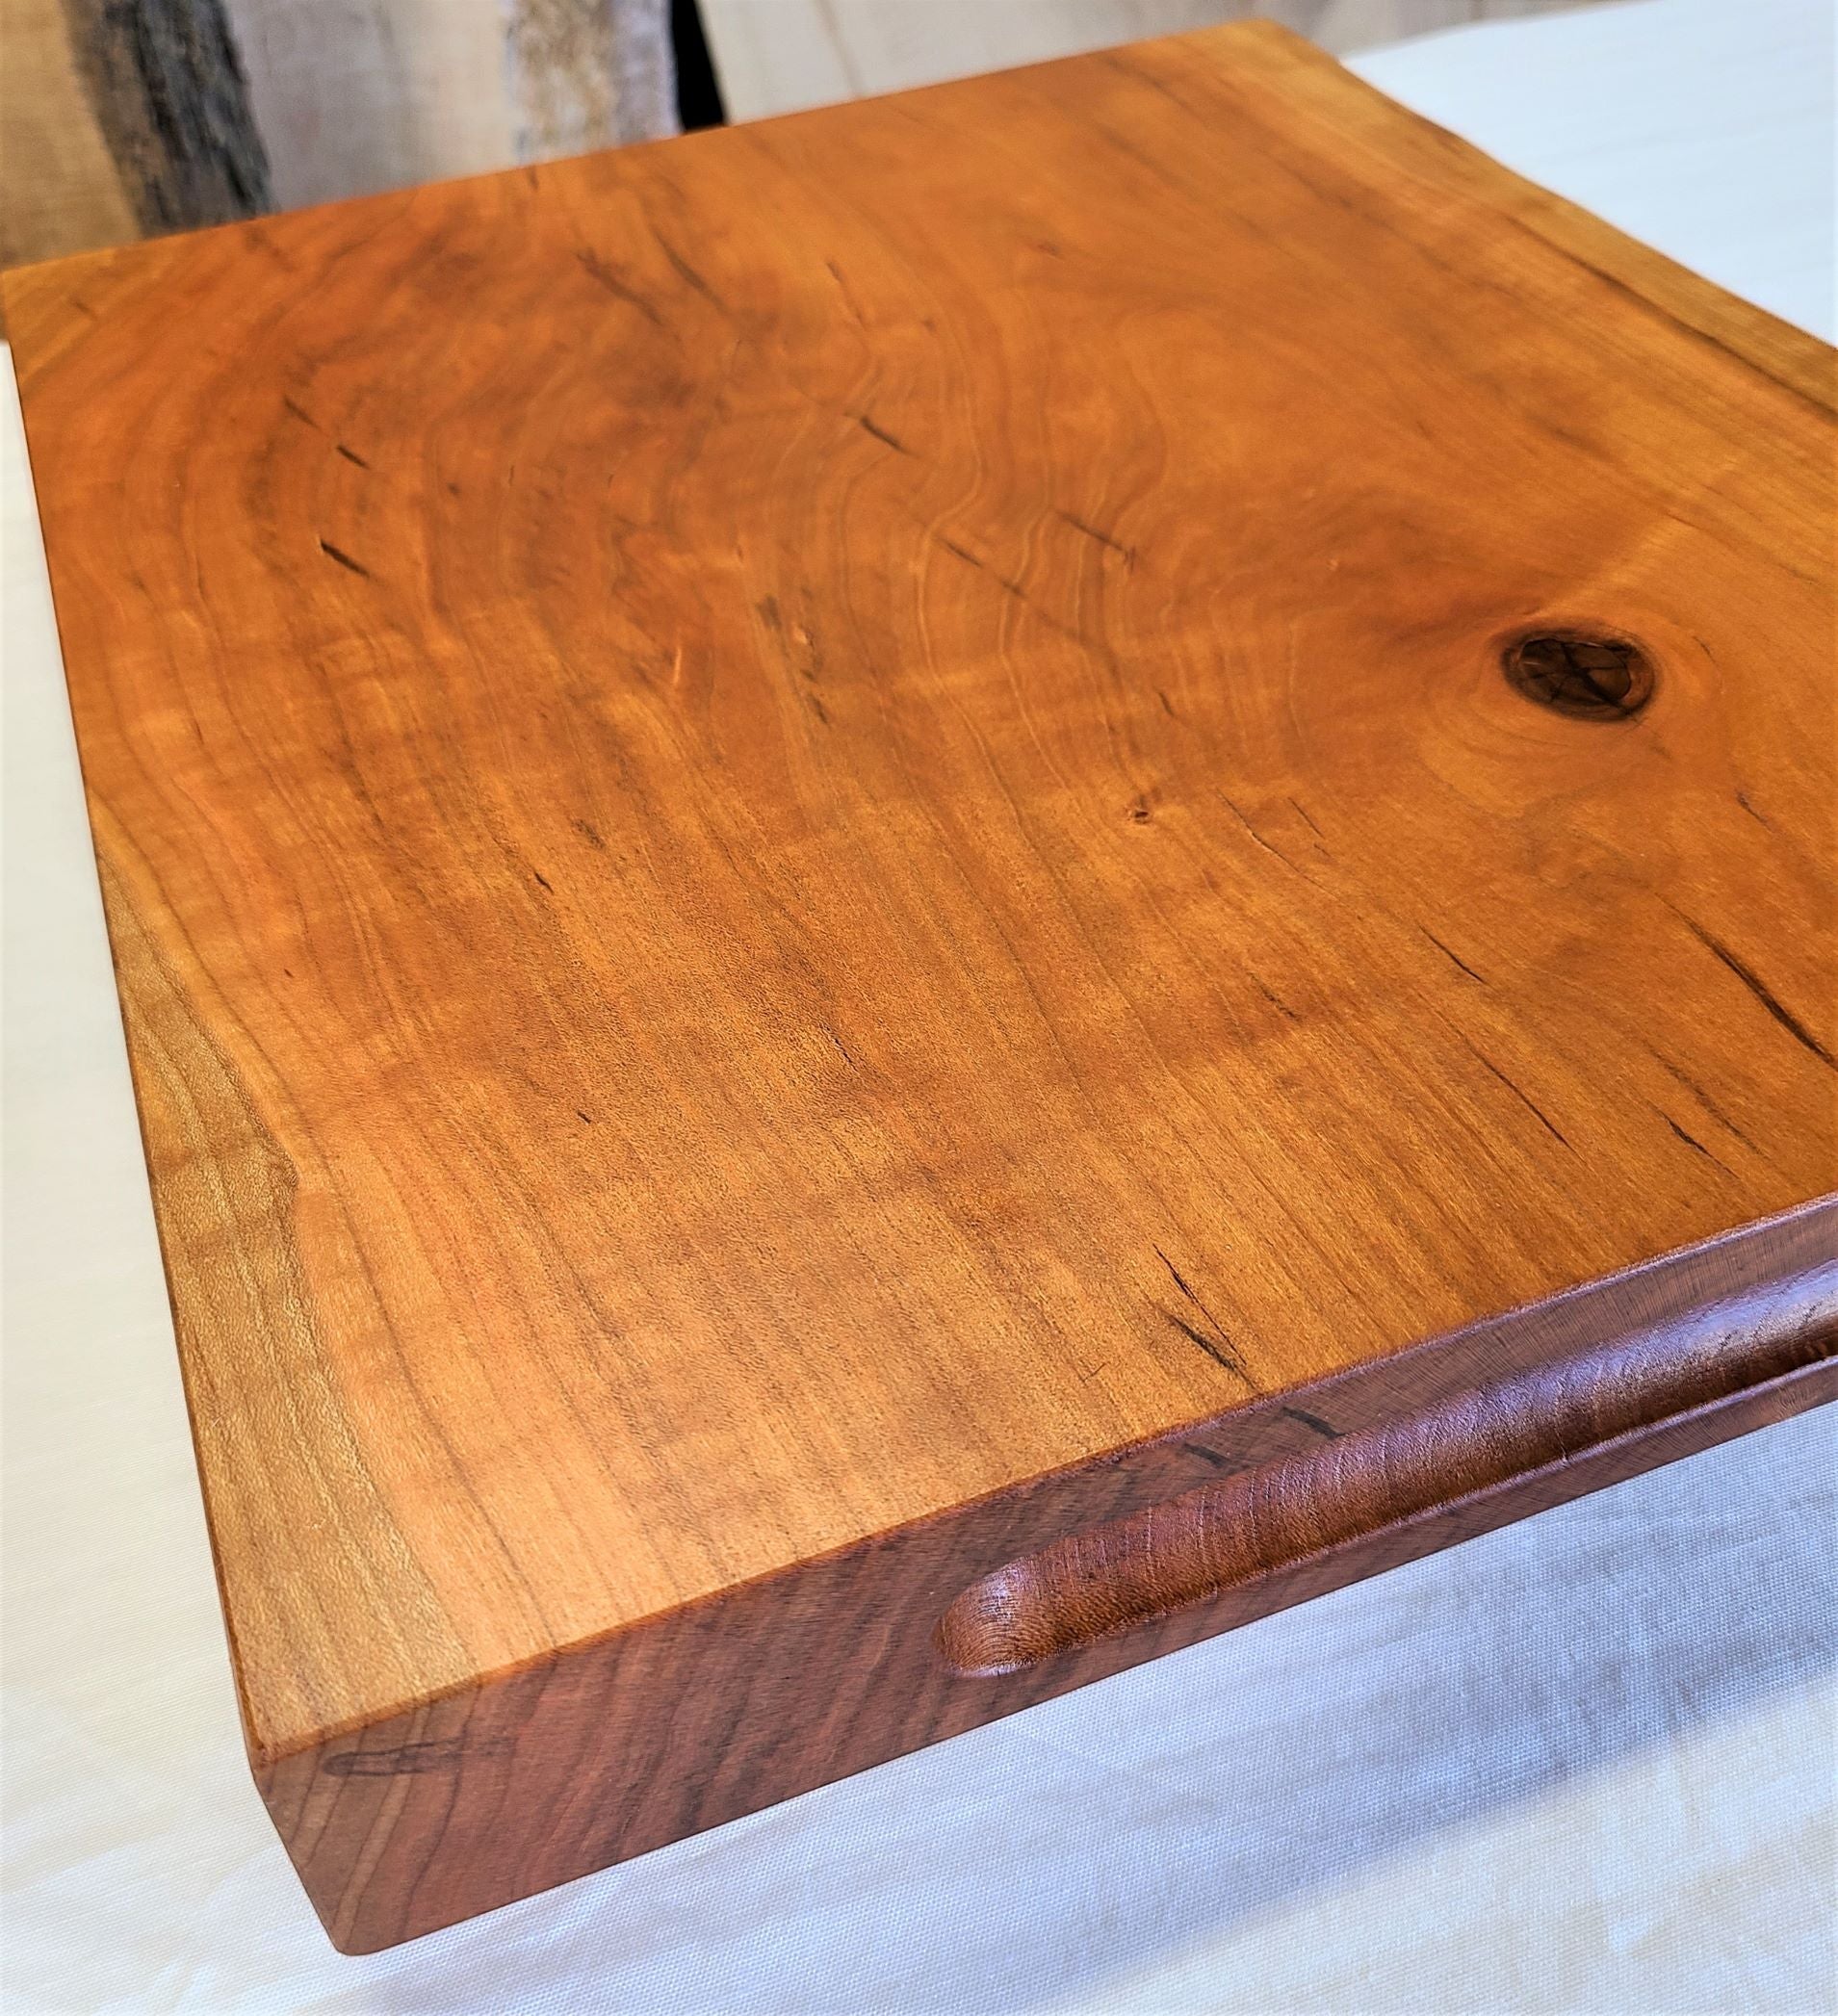 2" thick cherry custom cutting board.  Flat surface on both sides and has a live edge and routed finger holds.  Made in USA by ZimBoards.